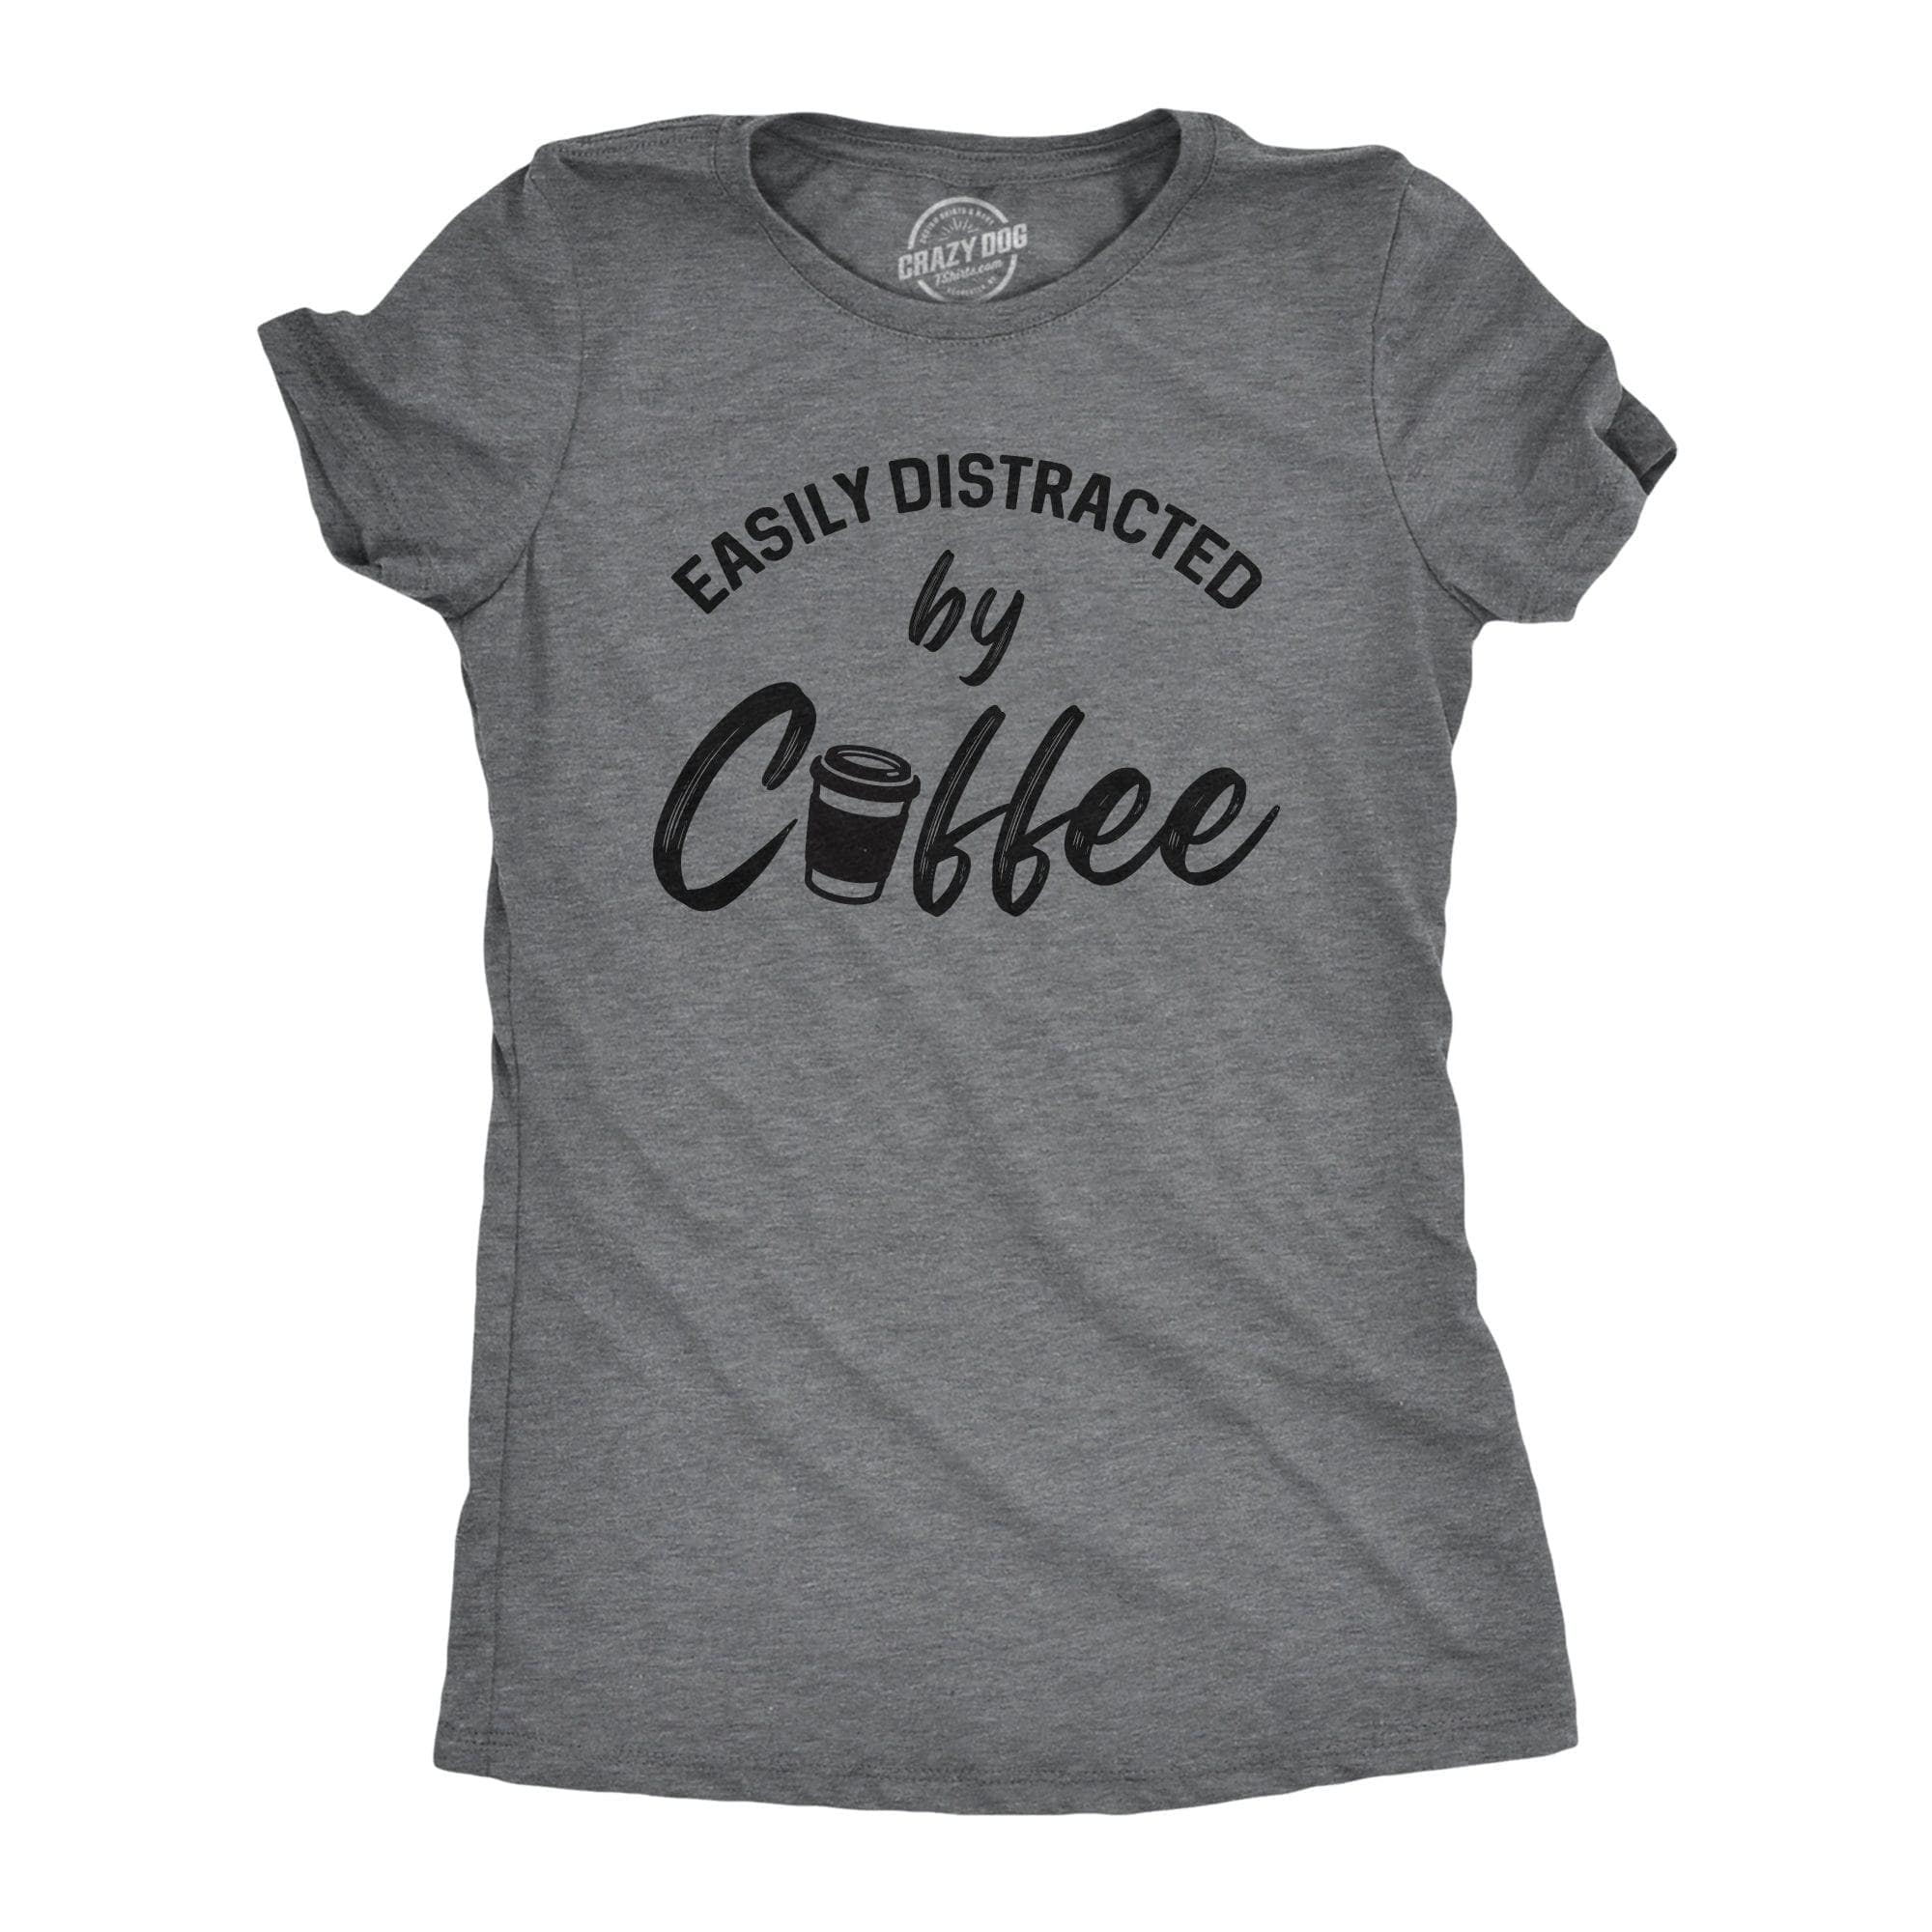 Easily Distracted By Coffee Women's Tshirt  -  Crazy Dog T-Shirts